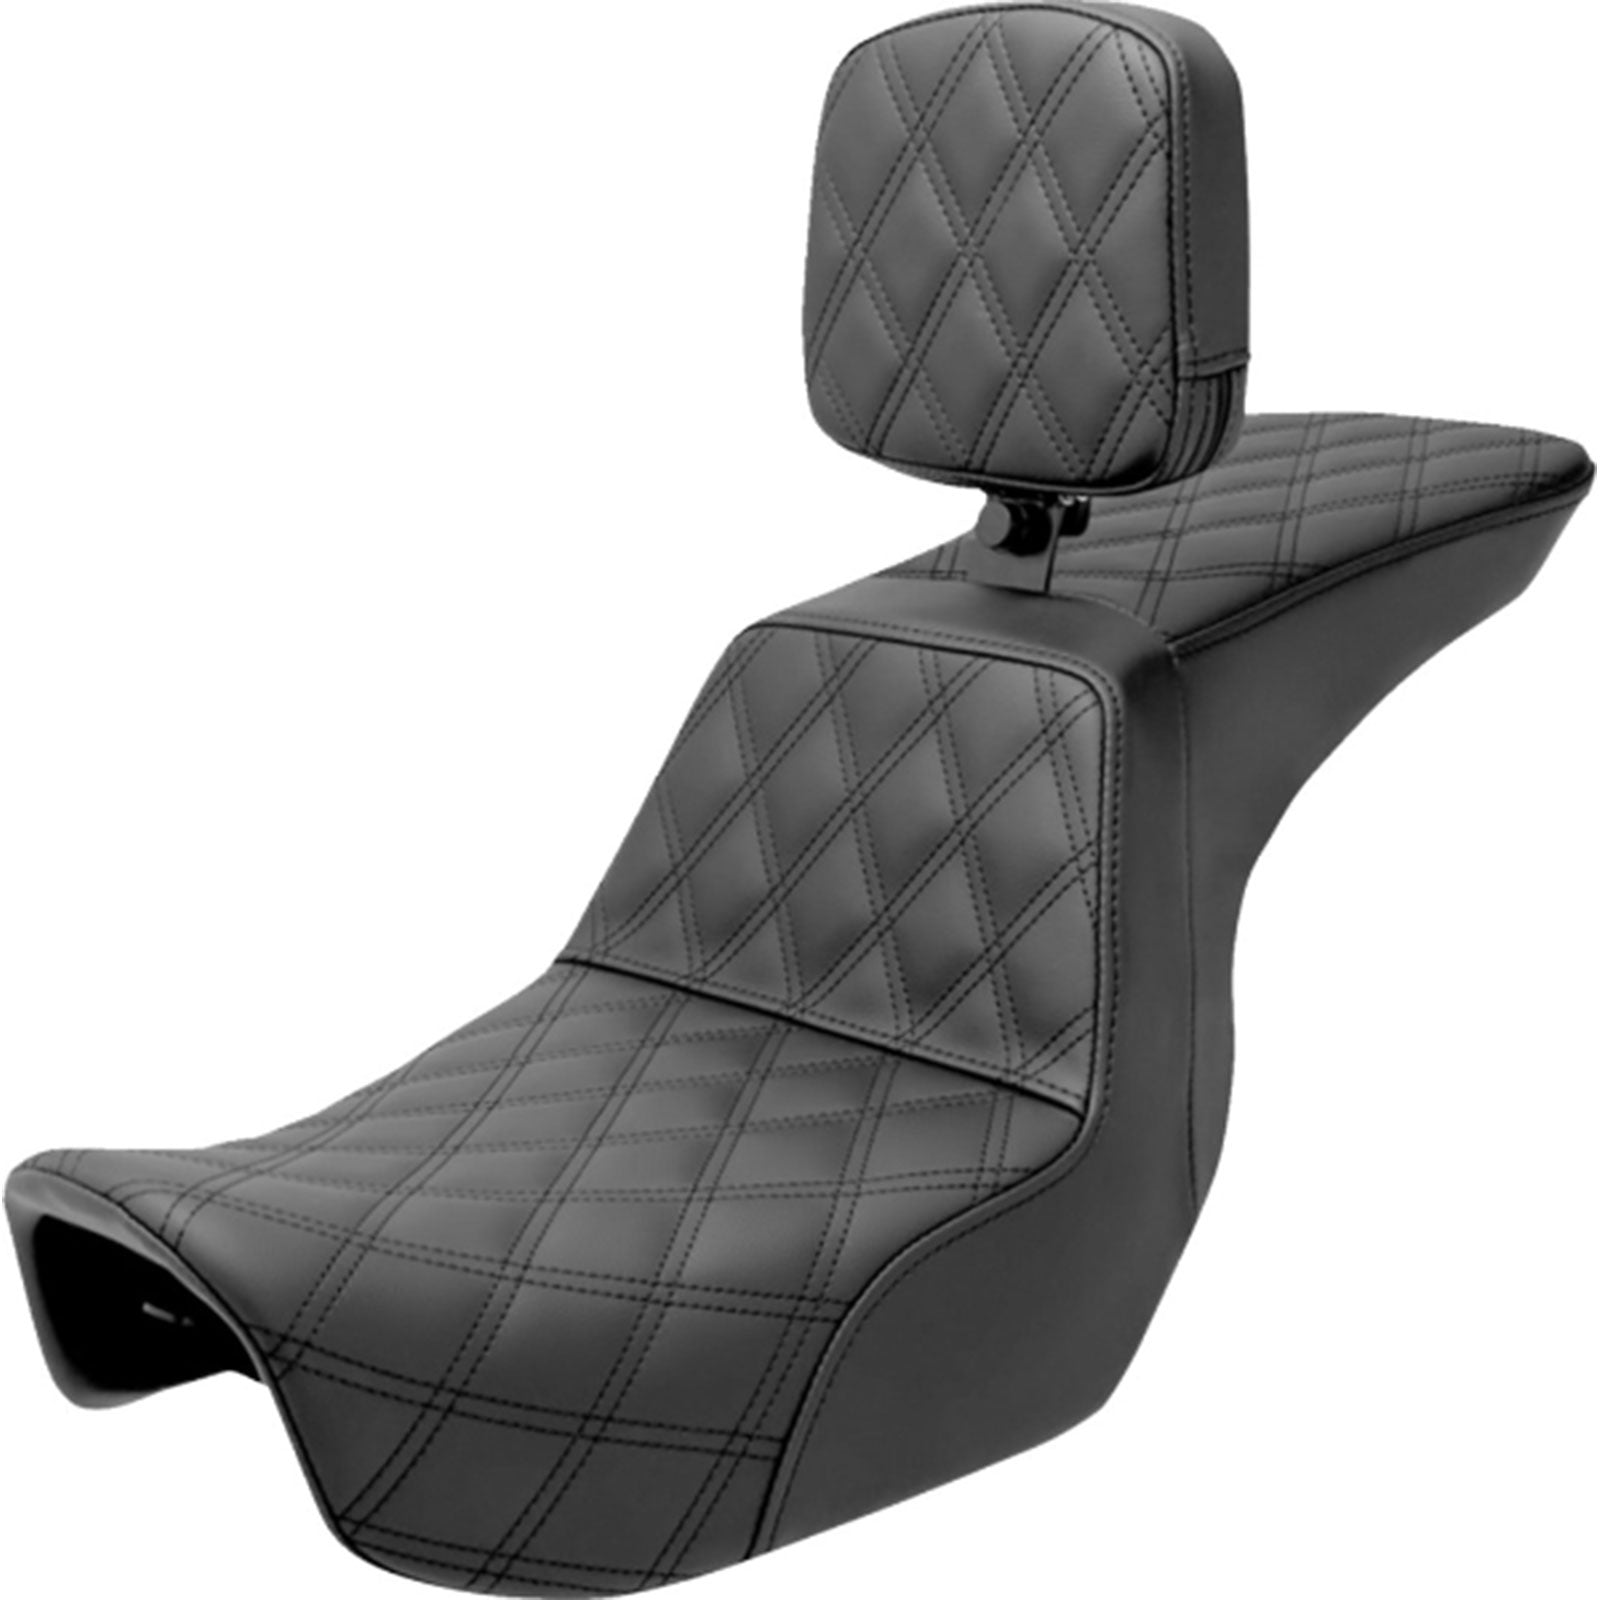 Saddlemen 2006-2017 Dyna Models Tour Step-Up Seat With Rider Backrest Seat Front & Rear LS Motorcycle Accessories-0803